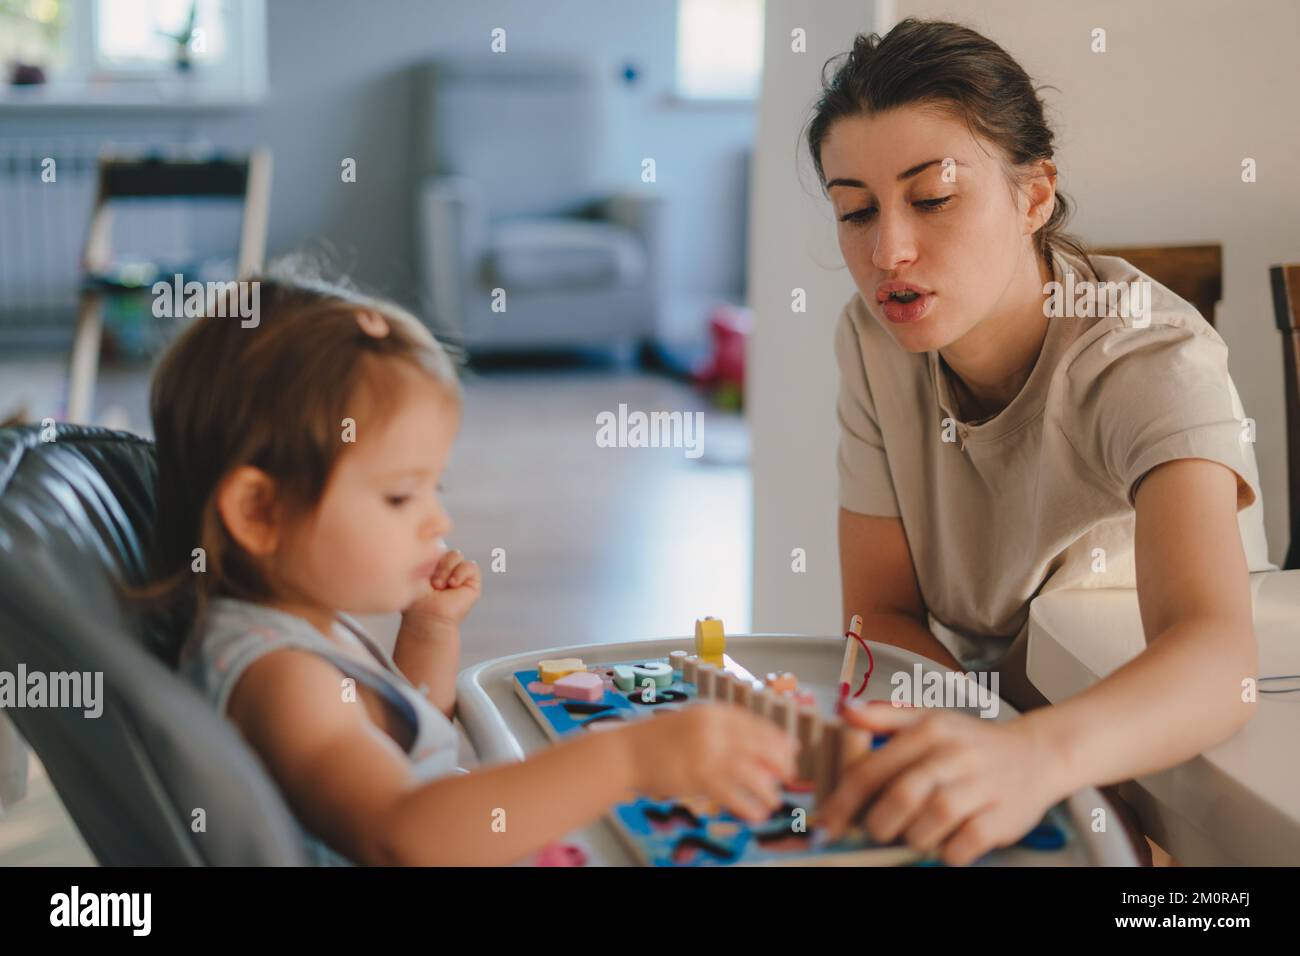 Happy little baby girl playing with colored wooden toy learning to count by playing with her mother at home. Teaching numbers at home. Childhood Stock Photo